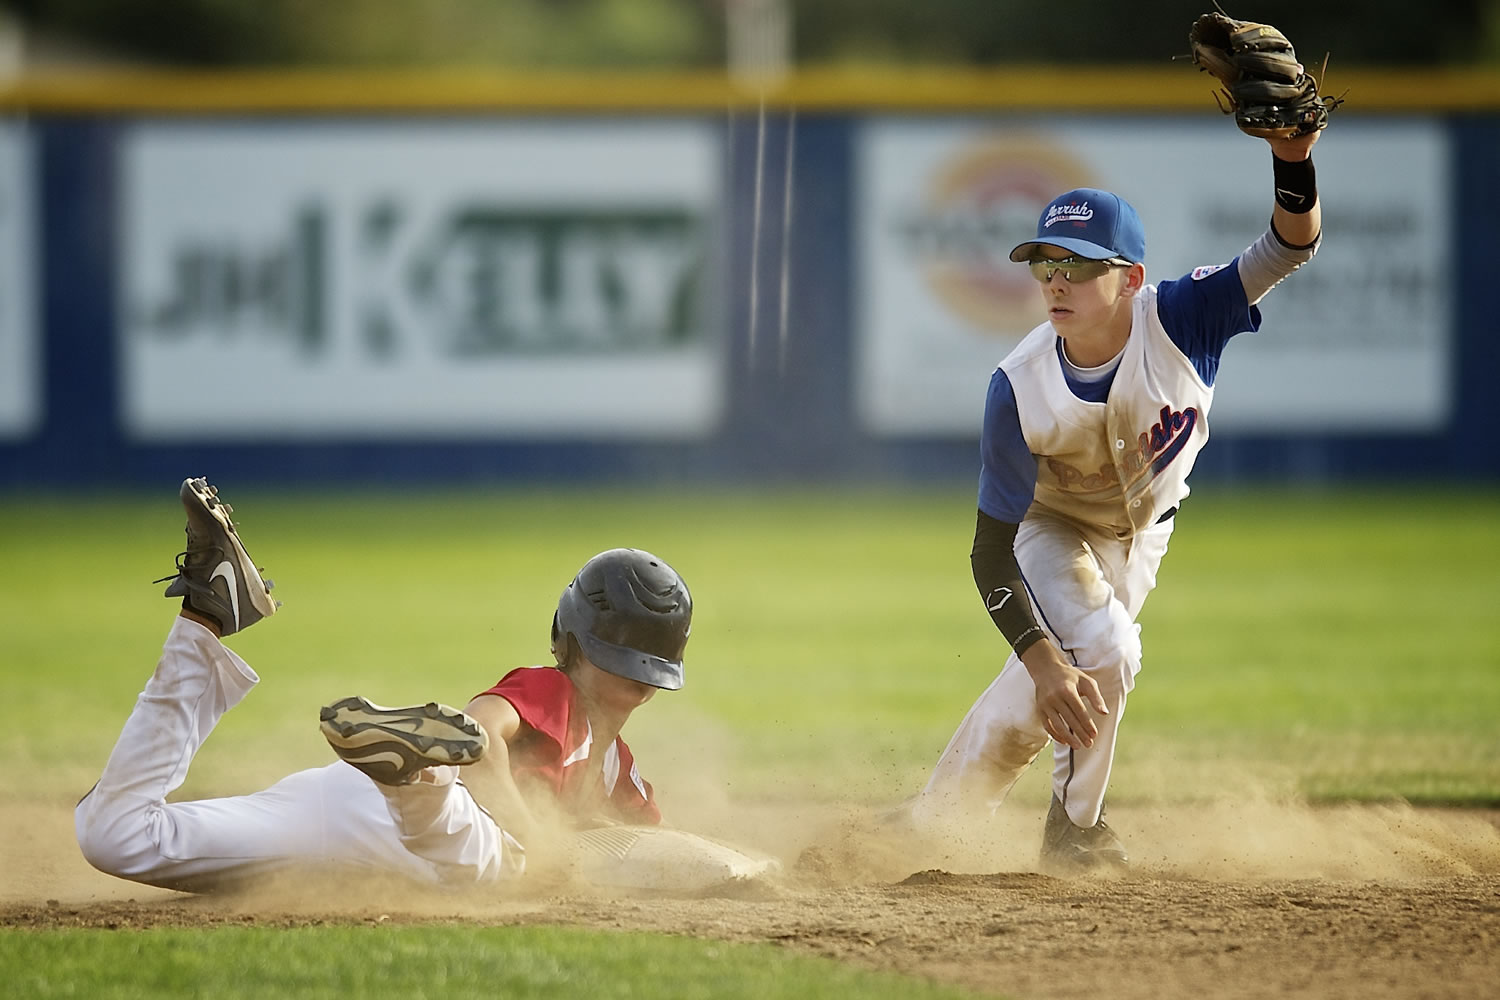 Noah Boatwright, right, of Parrish Little League lifts his glove after recording an out as Josh Mulcahey of Central Vancouver slides into second base.